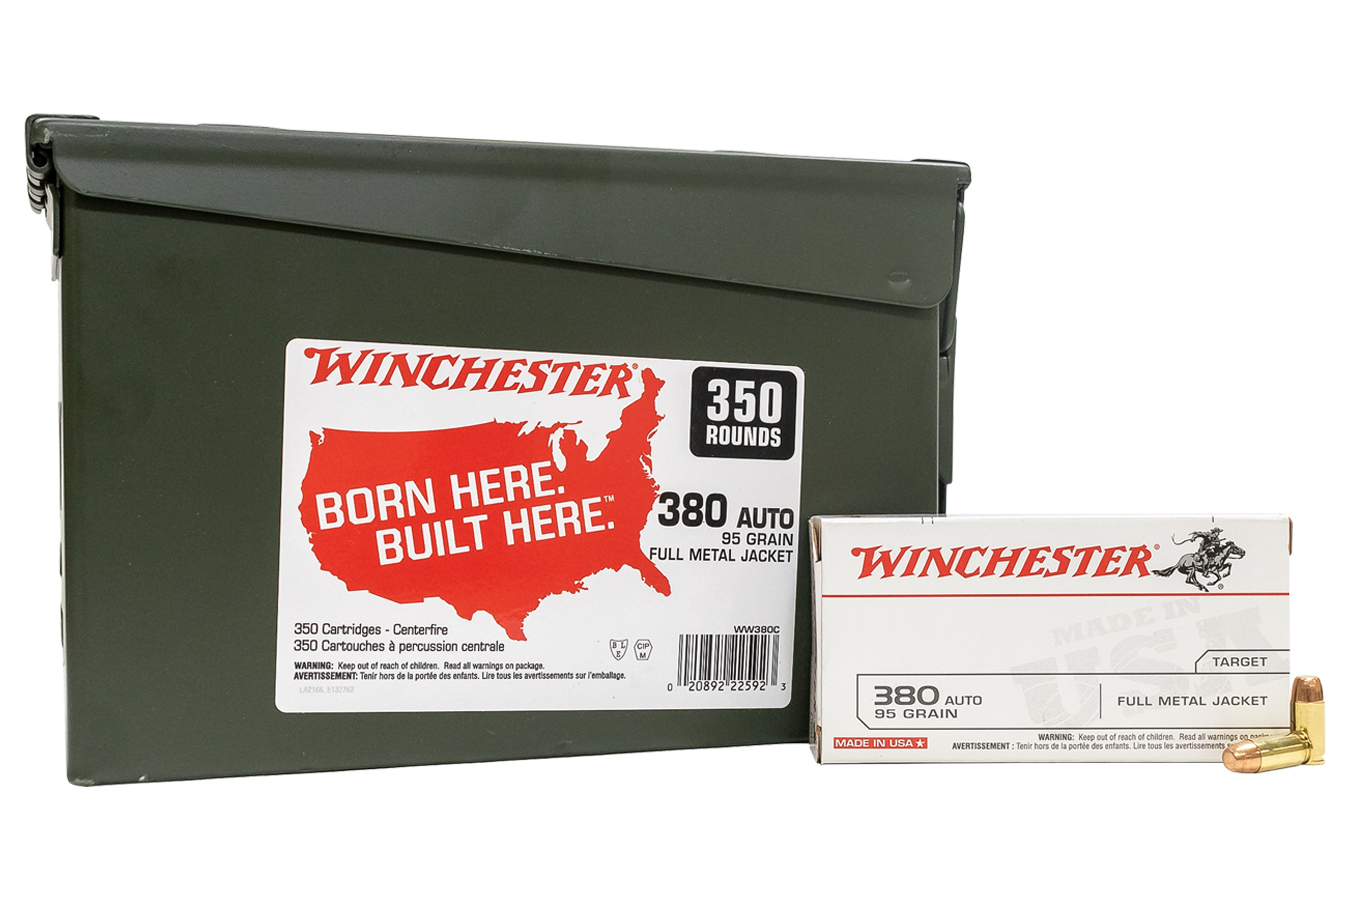 WINCHESTER AMMO 380 AUTO 95 GR FMJ AMMO CAN